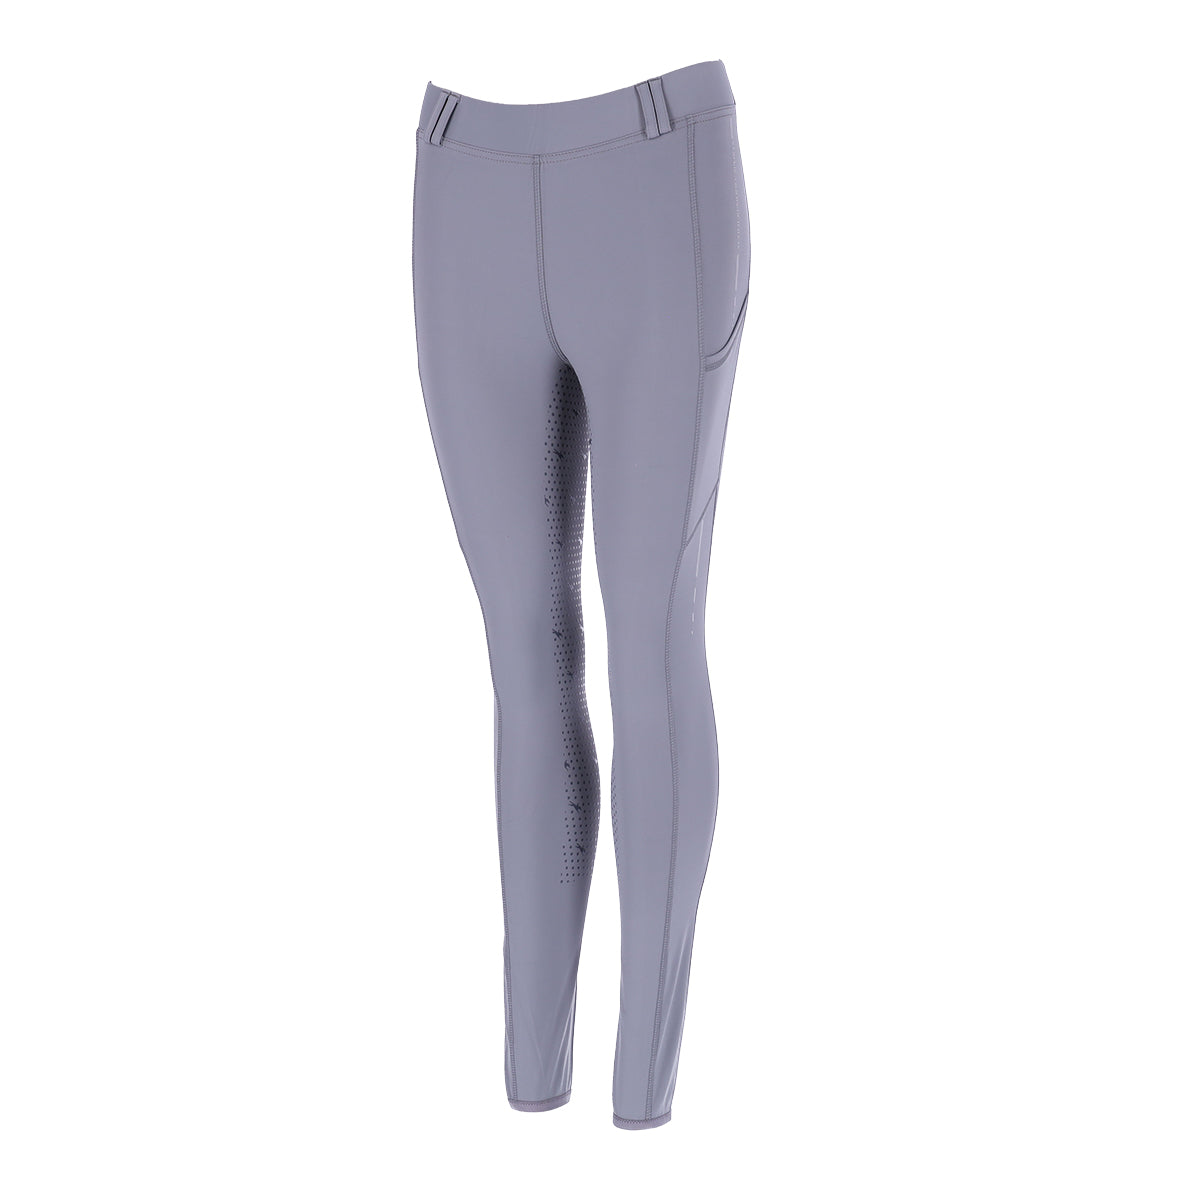 S/Mohle Wmn New Pocket Riding Tights FS Style Slate Grey